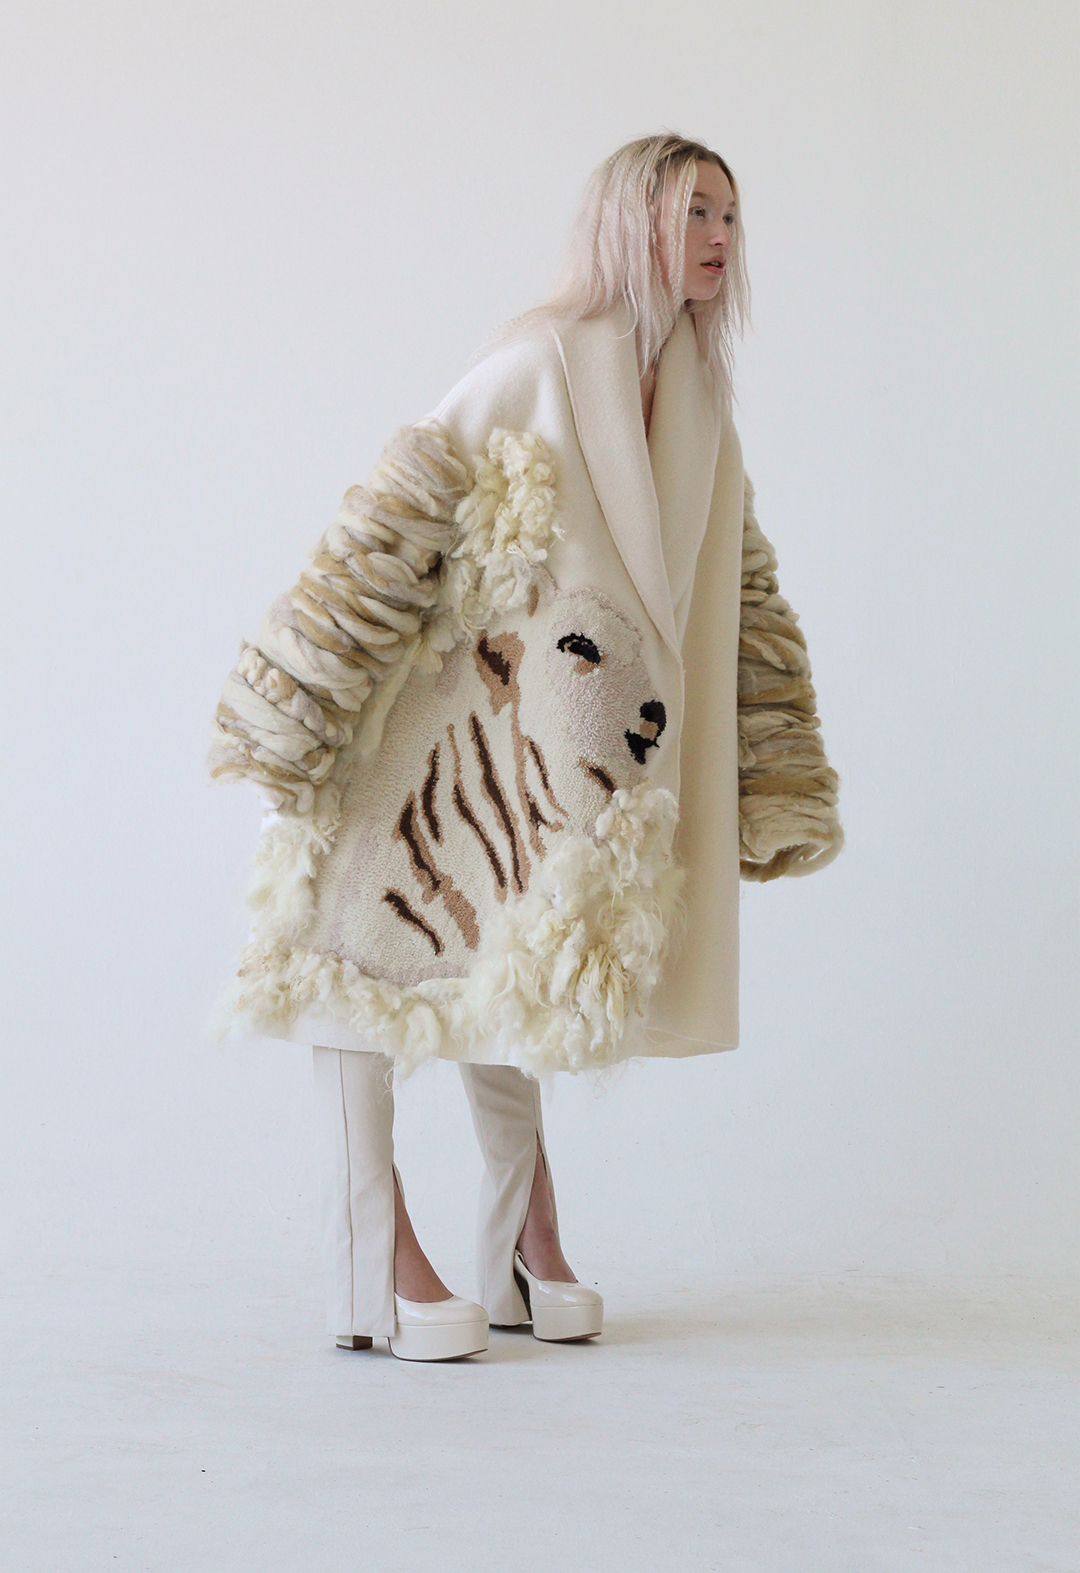 The model is standing and leaning forward, wearing a cream shawl collar coat with oversized drape, and tight, cream-colored stretch leather pants, rug-tufted sheep profile/portrait/motif.